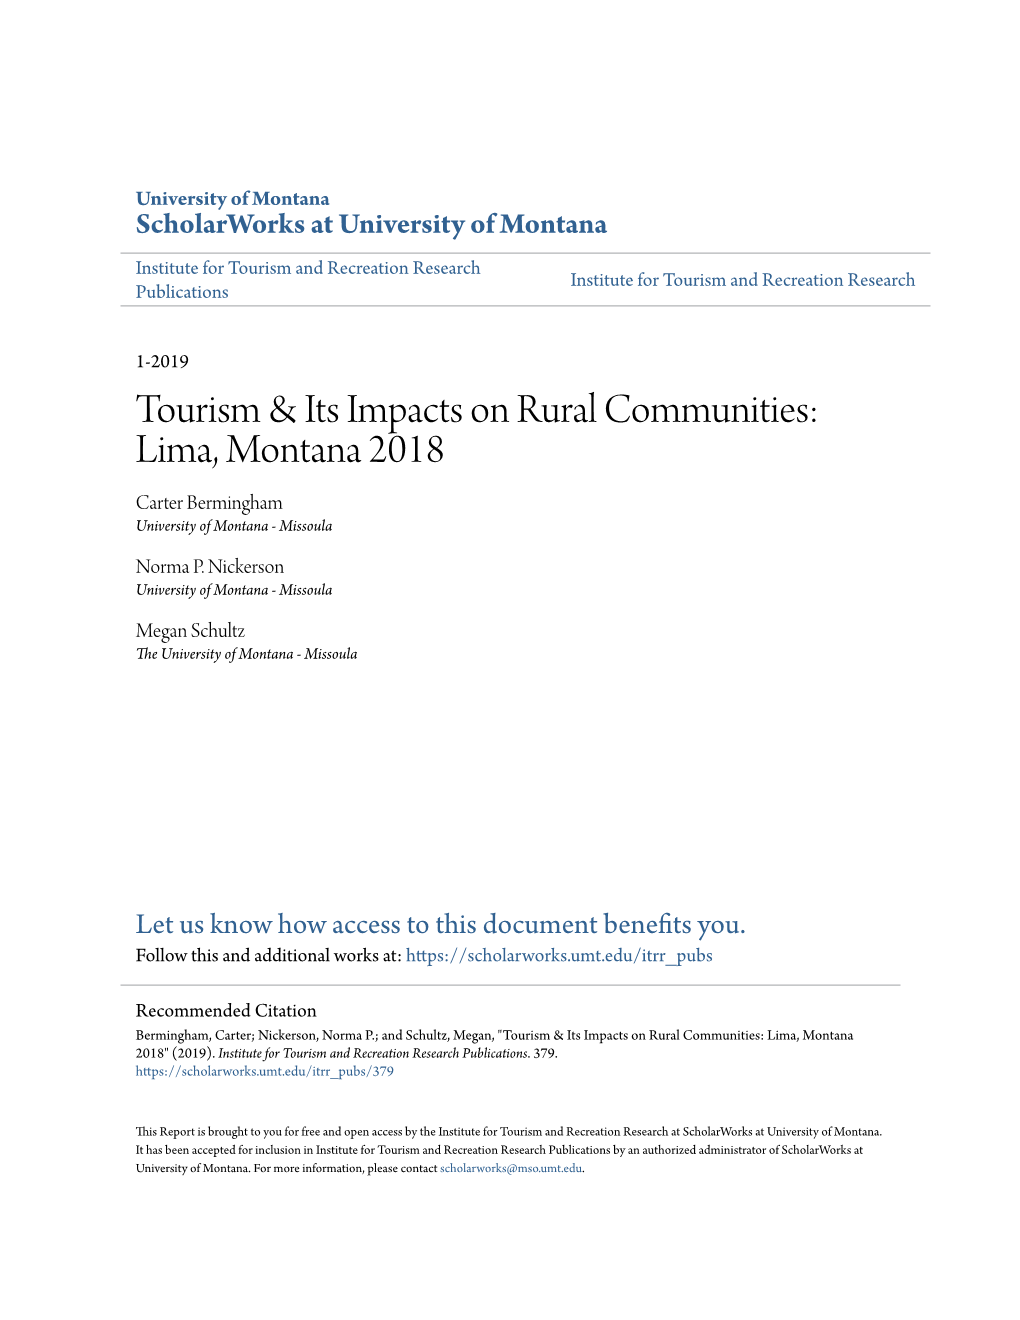 Tourism & Its Impacts on Rural Communities: Lima, Montana 2018